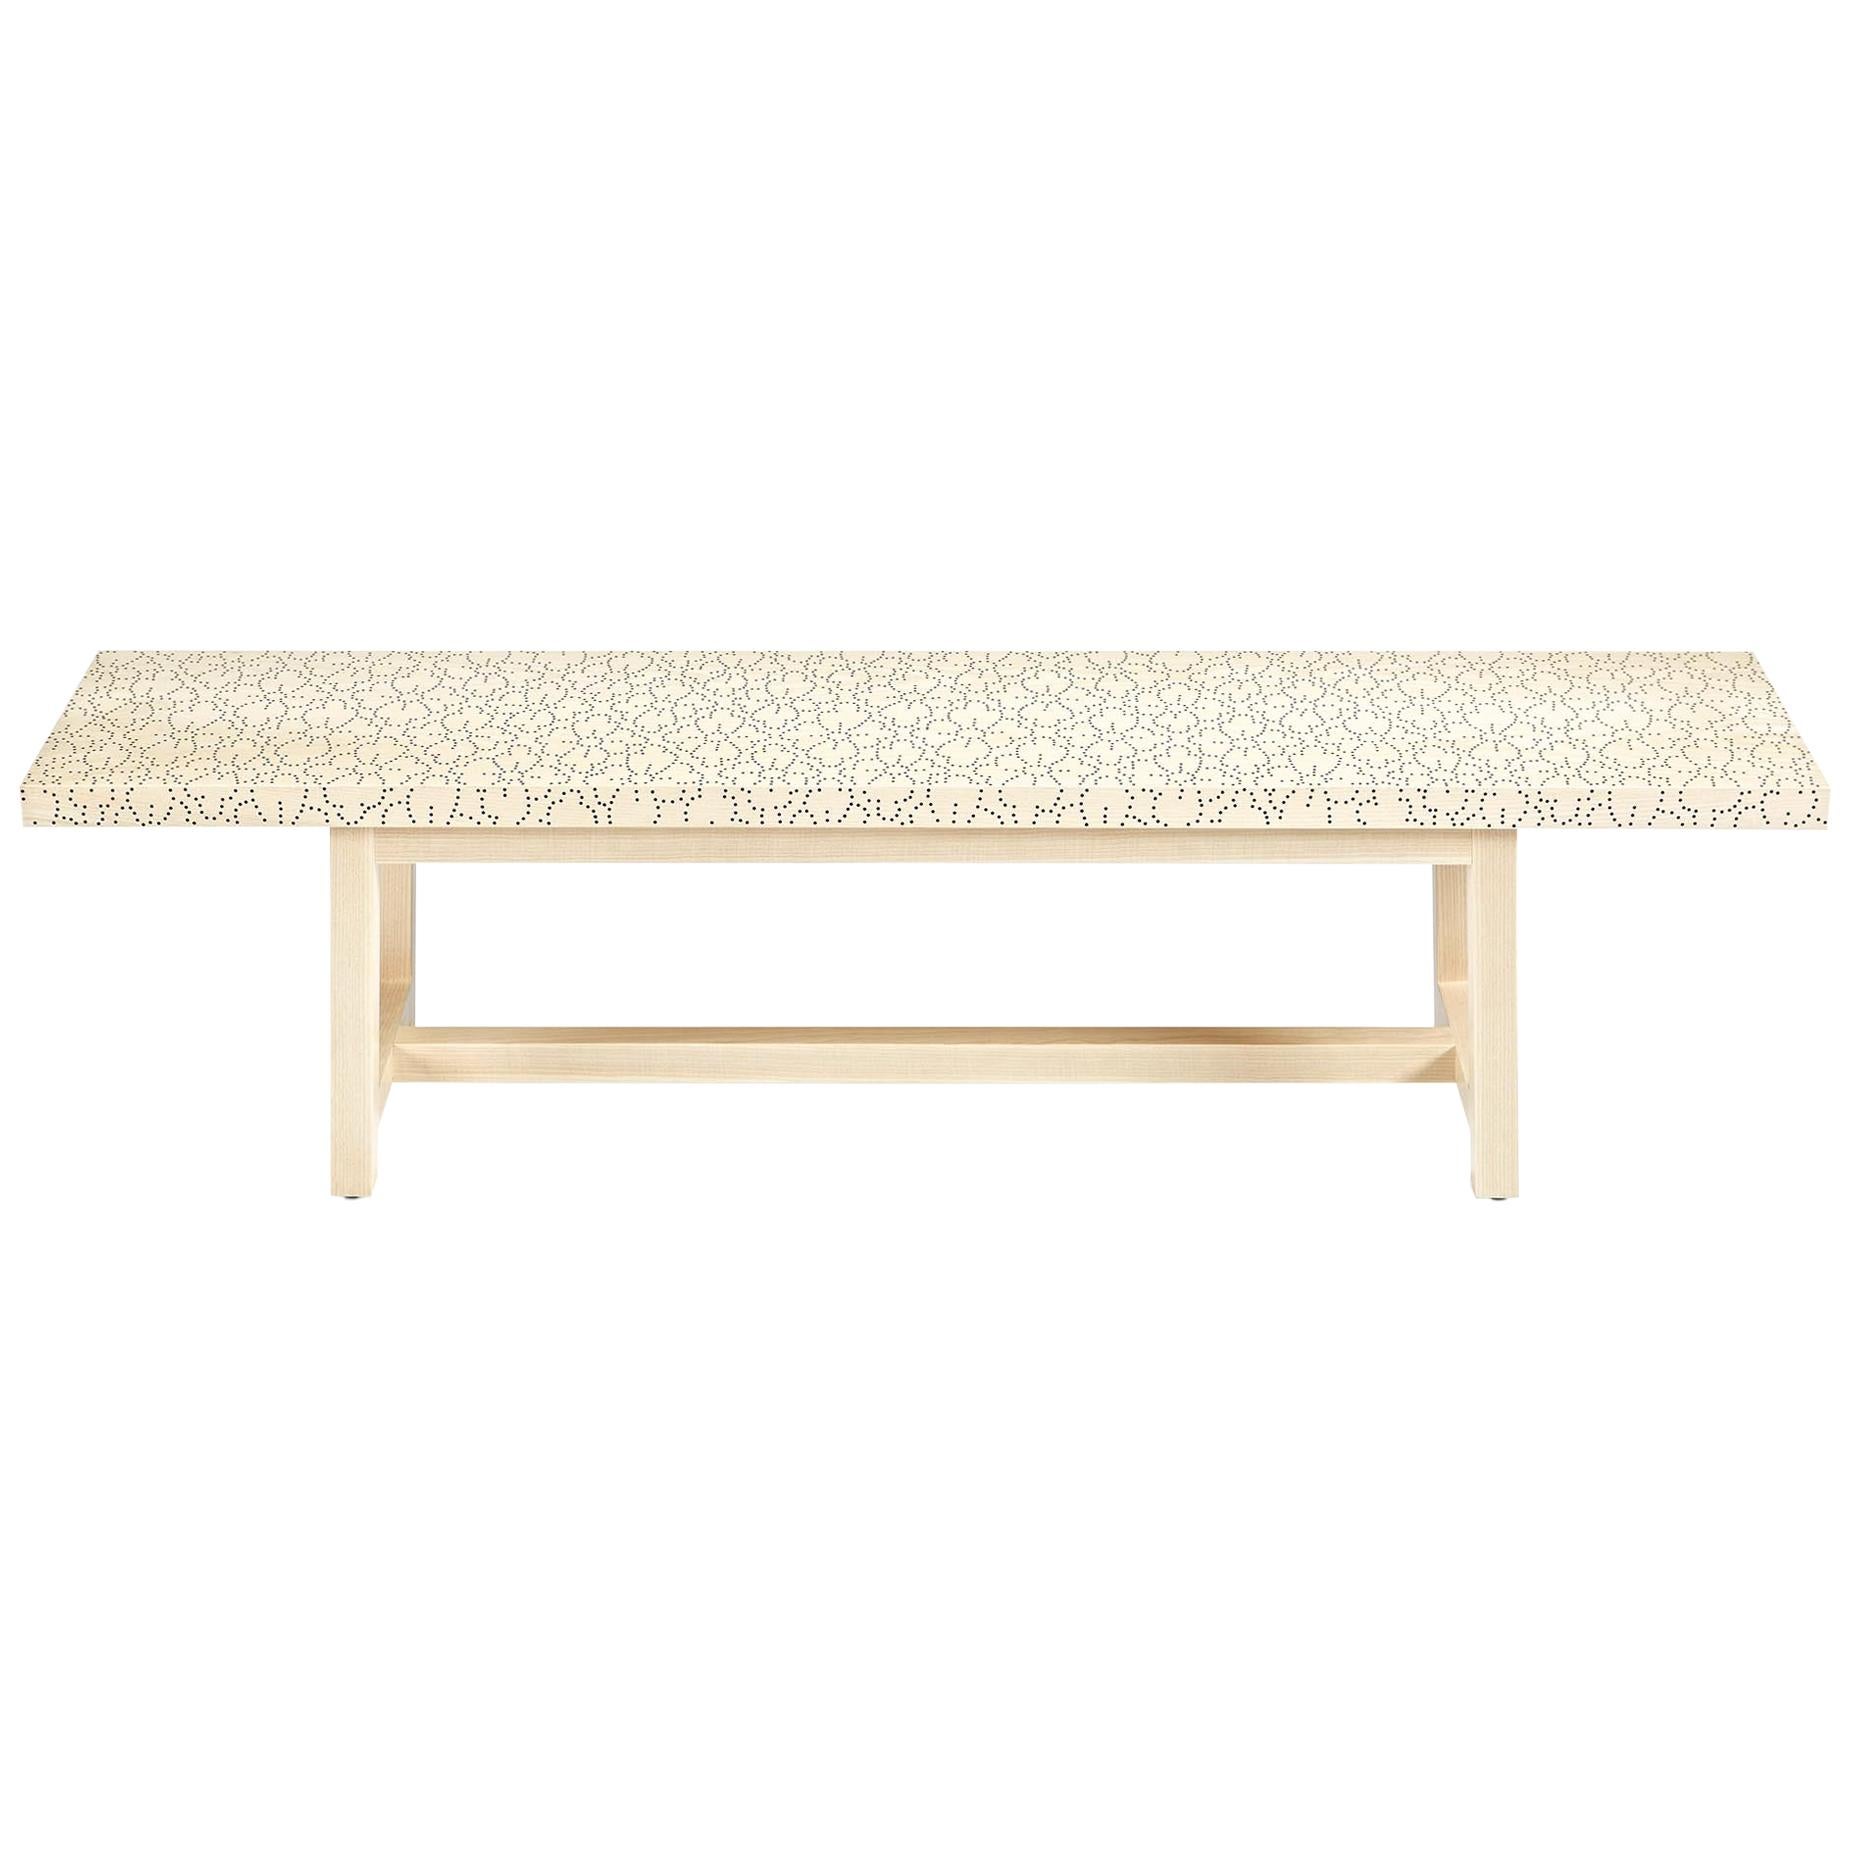 Modern Contemporary Nail Inlay Bench No. 302 by Peter Sandback   bleached ash For Sale